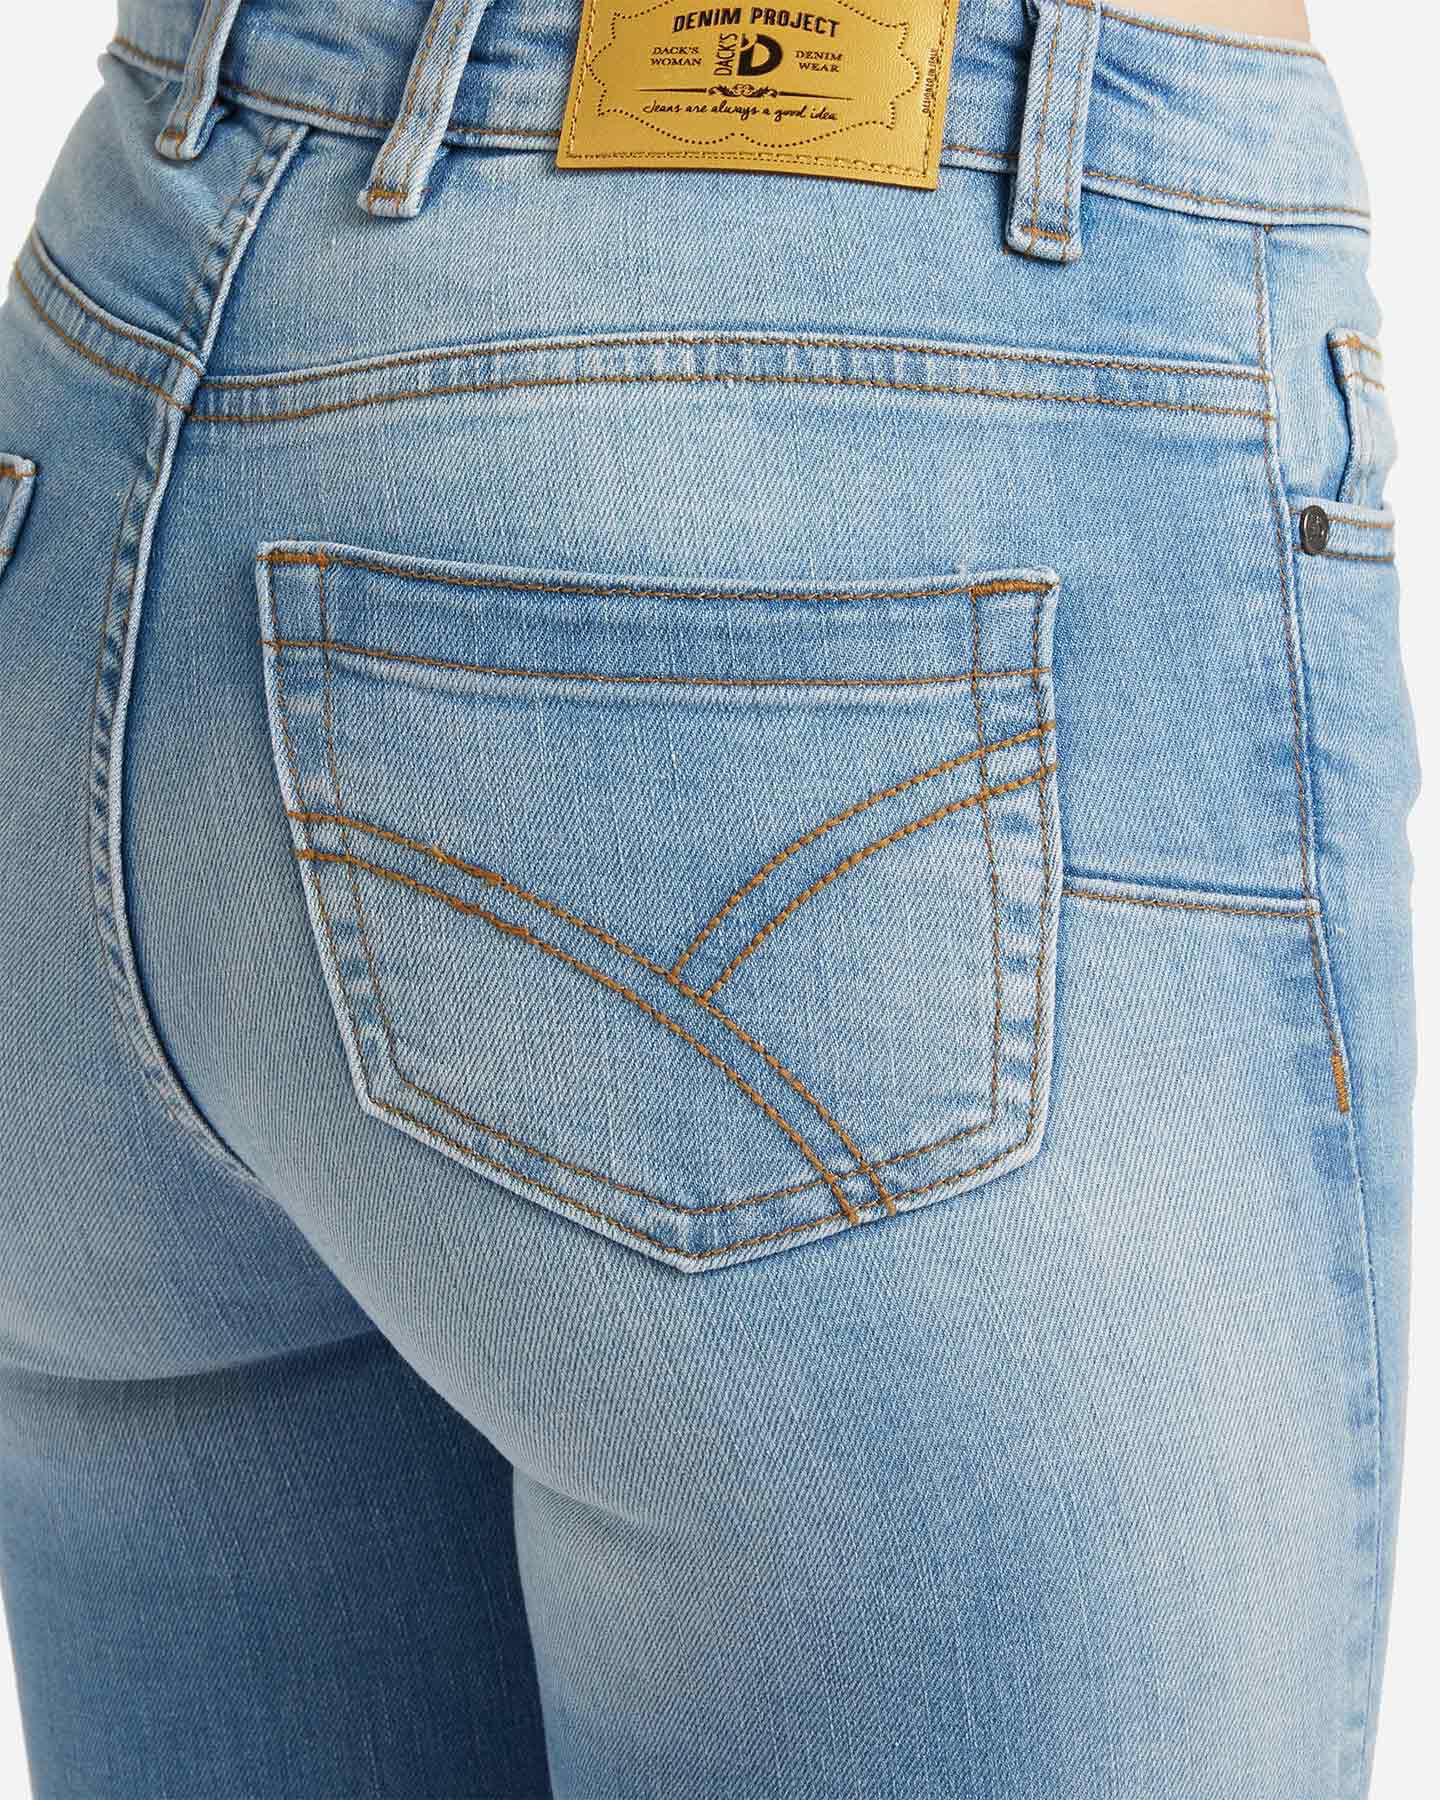  Jeans DACK'S DENIM PROJECT W S4118475|LD|40 scatto 3